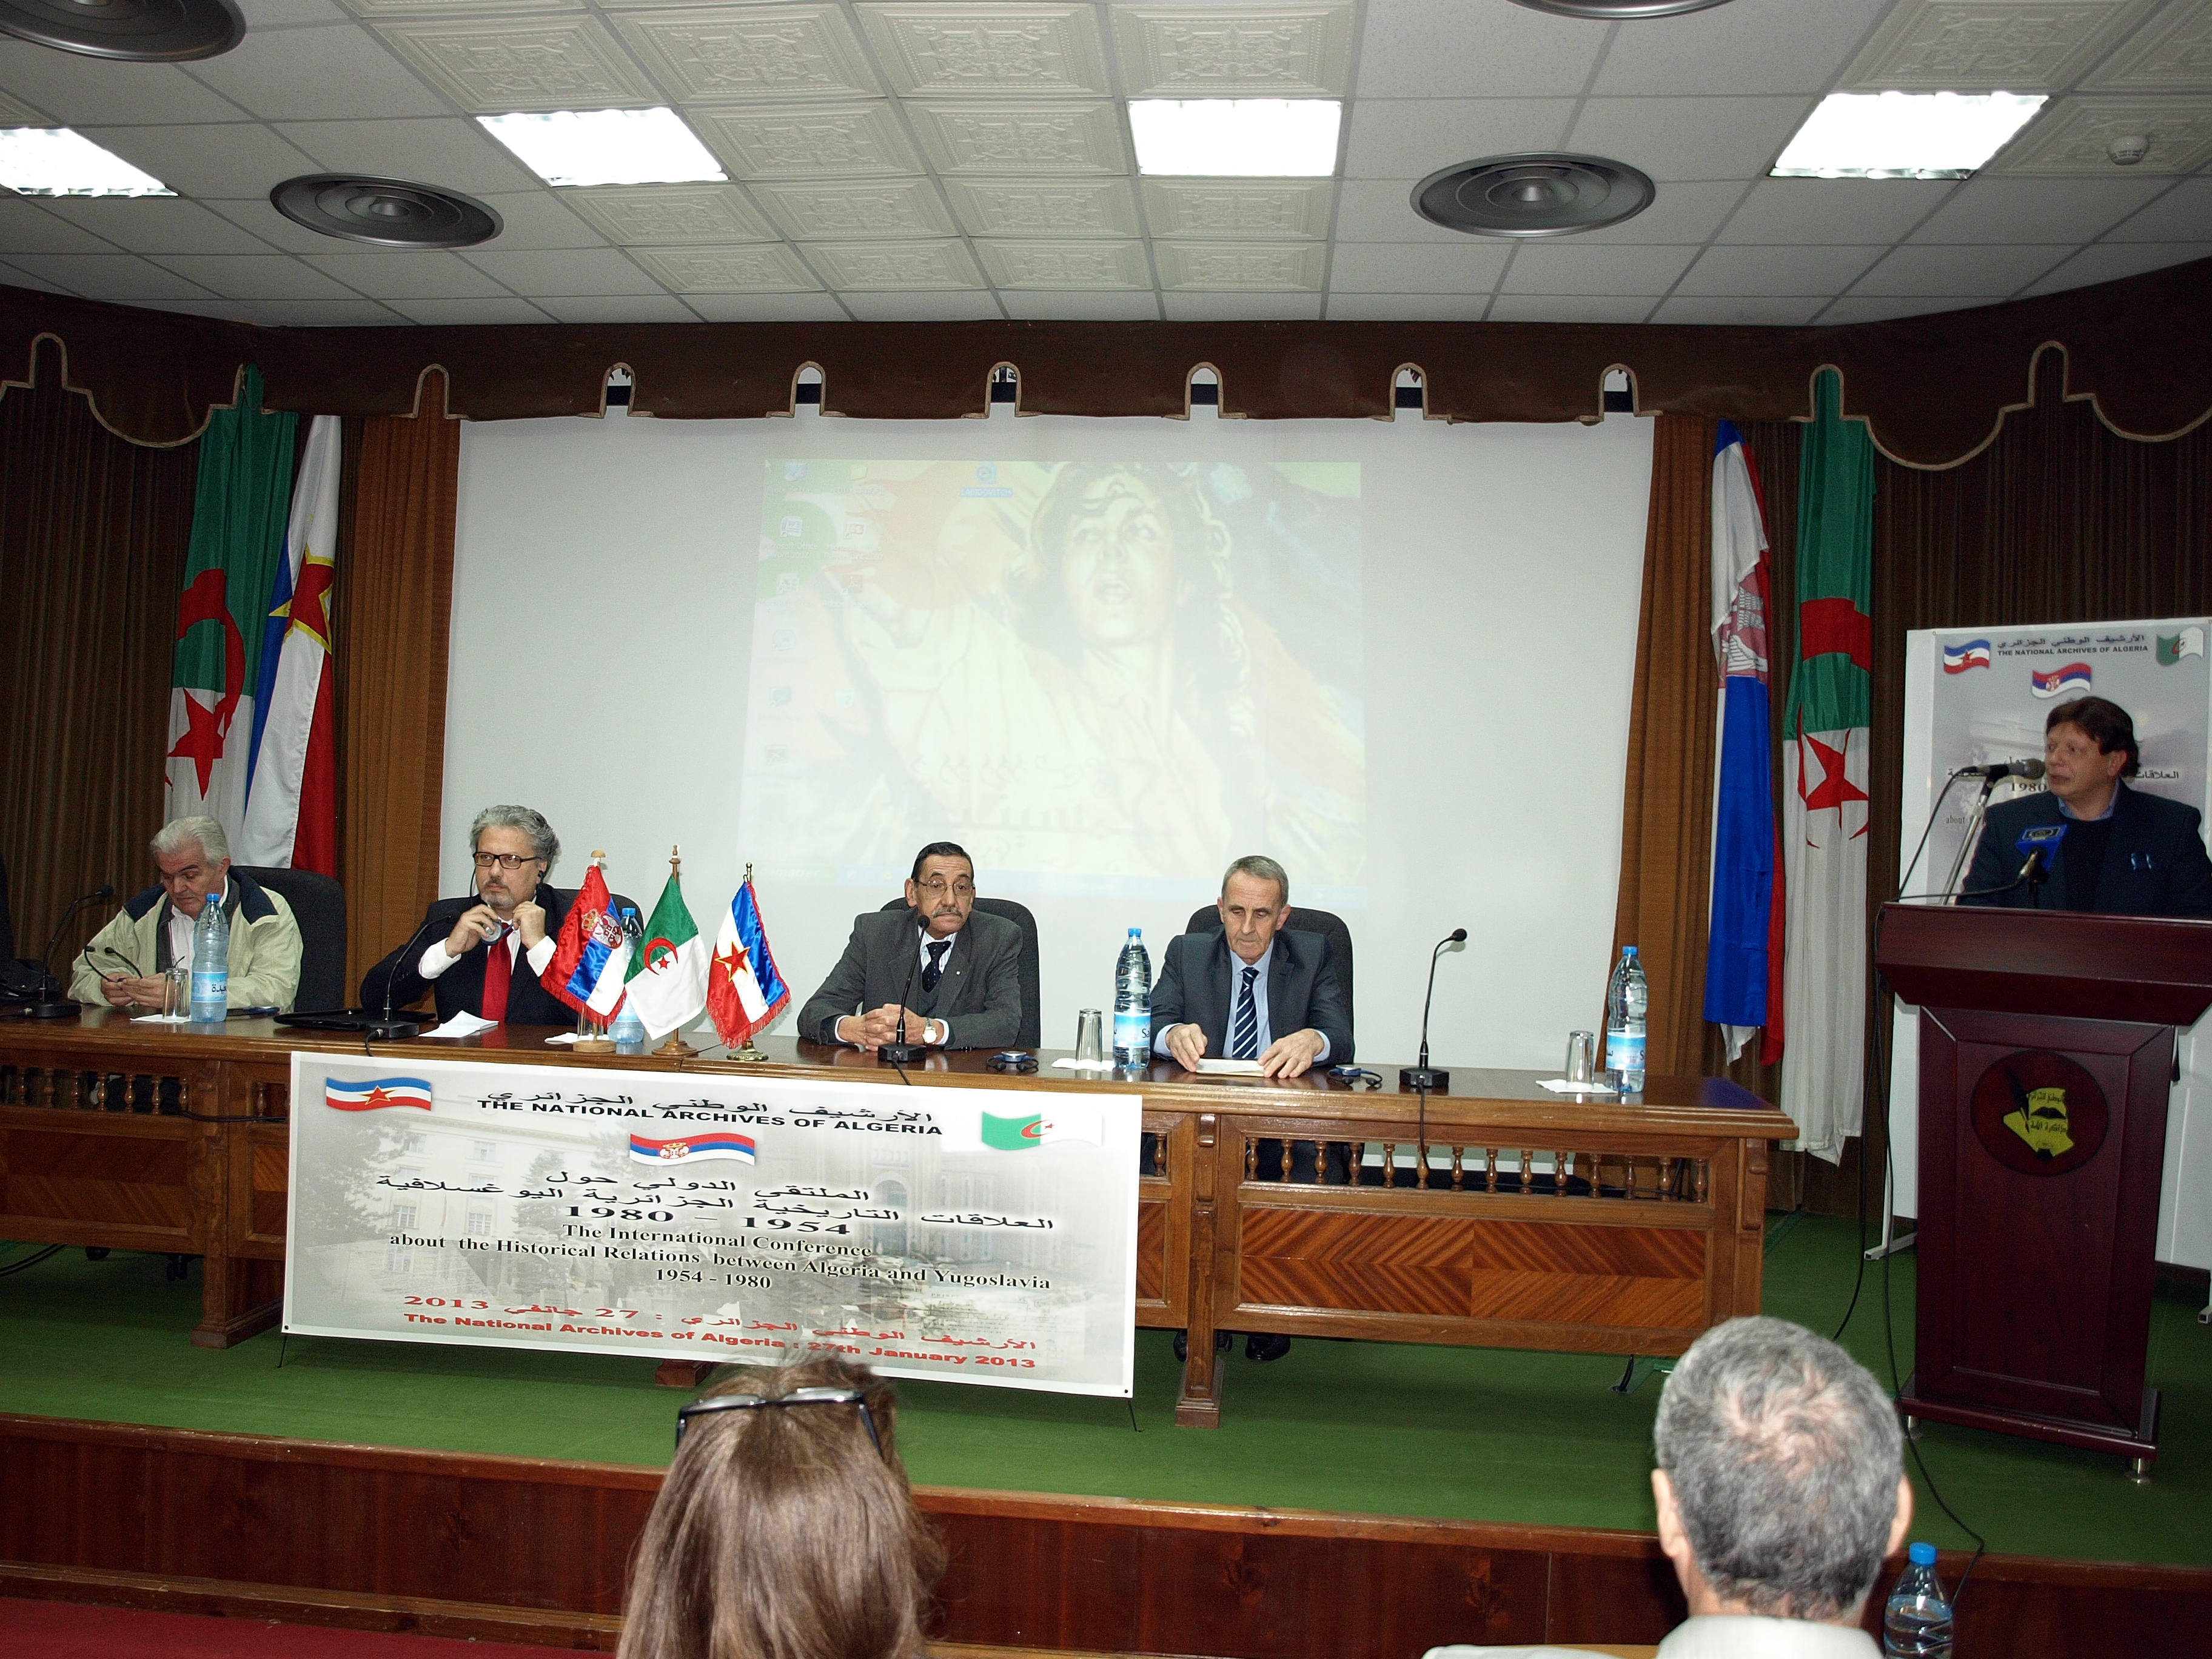 The International Conference